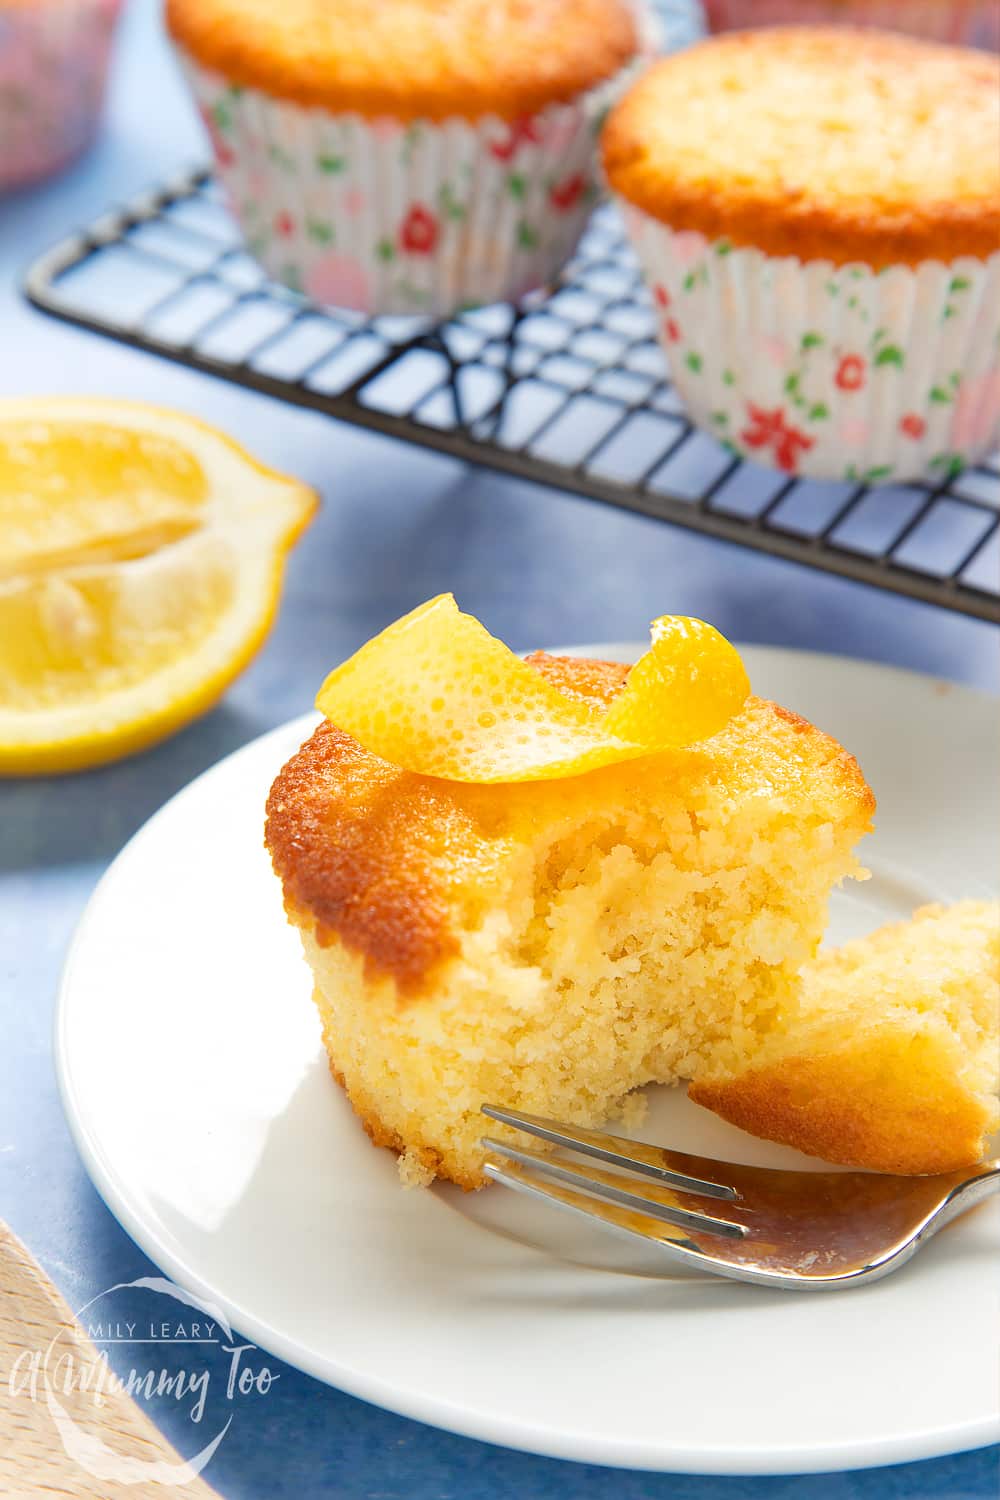 Lemon drizzle cupcake on a white plate with a cake fork. A curl on lemon ring sits on top of the cake, which has been cut open.